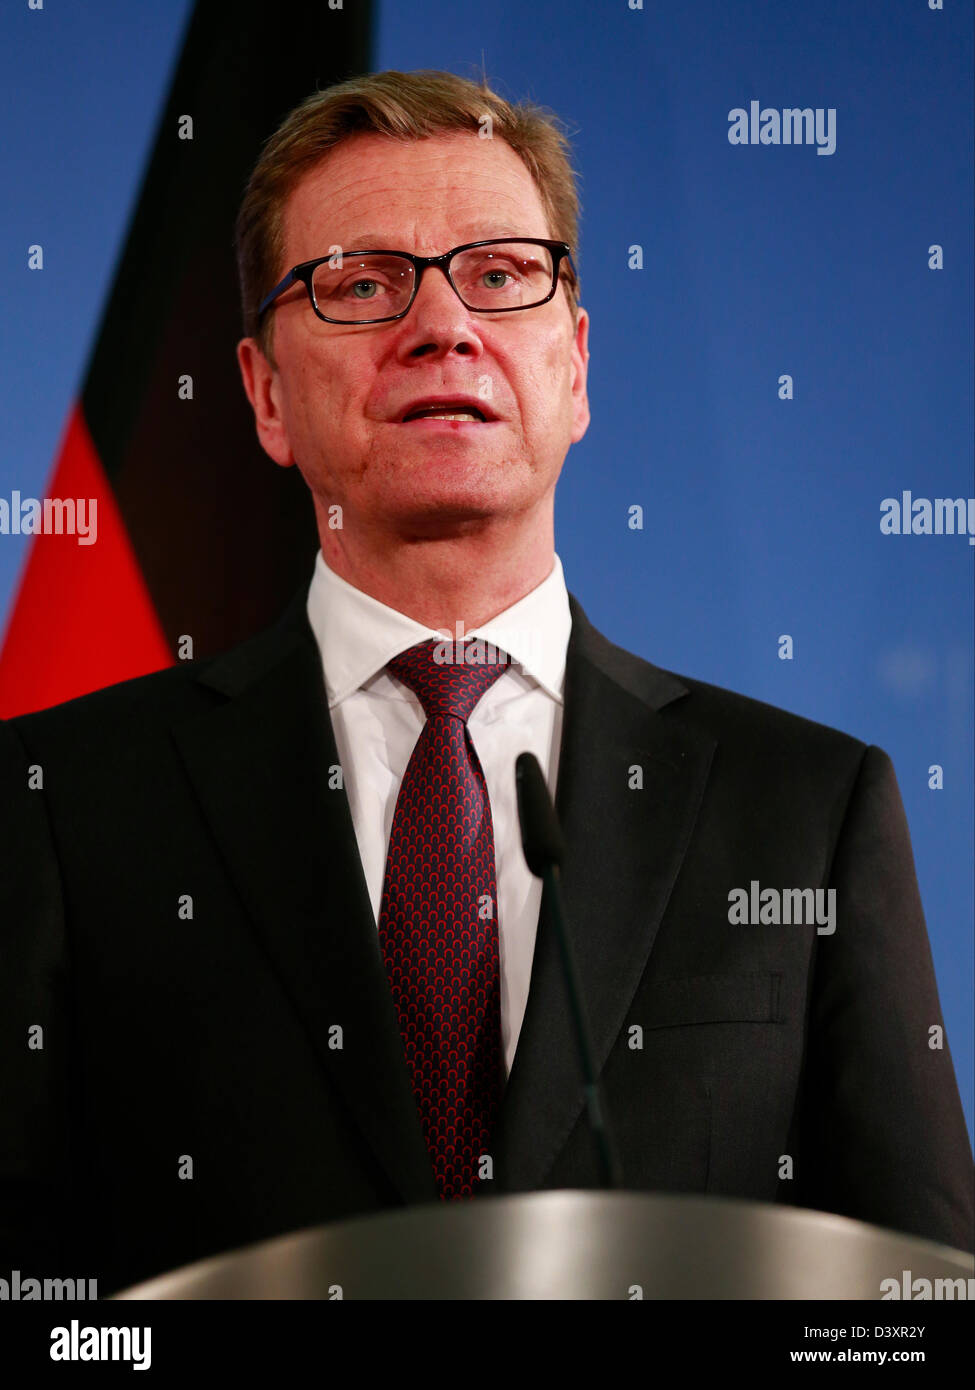 Berlin, Germany.  26 February 2013. Press statements after the meeting between the U.S. Secretary of state John Kerry and the German Foreign Minister Guido Westerwelle in Berlin. On Picture: Guido Westerwelle, German Foreign Minister. Credit:  Reynaldo Chaib Paganelli / Alamy Live News Stock Photo